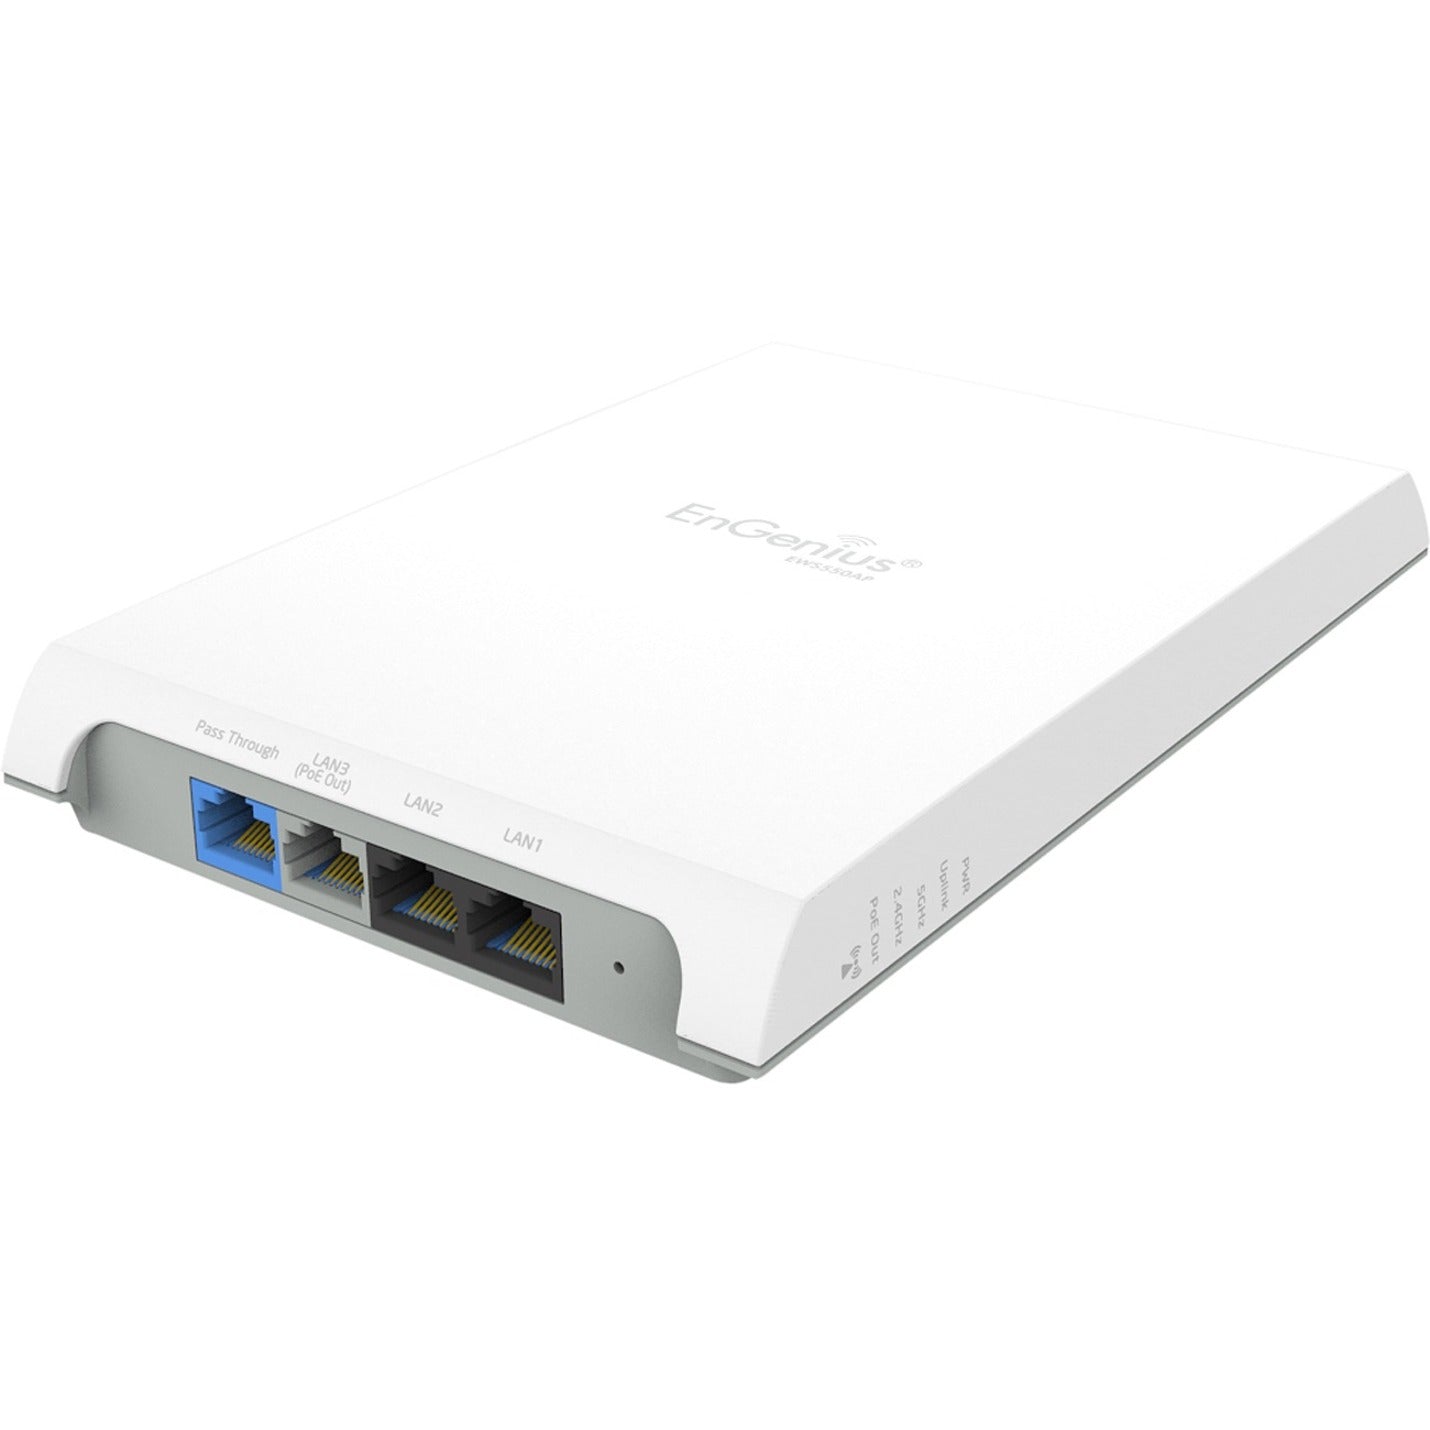 EnGenius EWS550AP Dual Band AC1300 Indoor Wall Plate Access Point, Gigabit Ethernet, 1.24 Gbit/s Wireless Transmission Speed